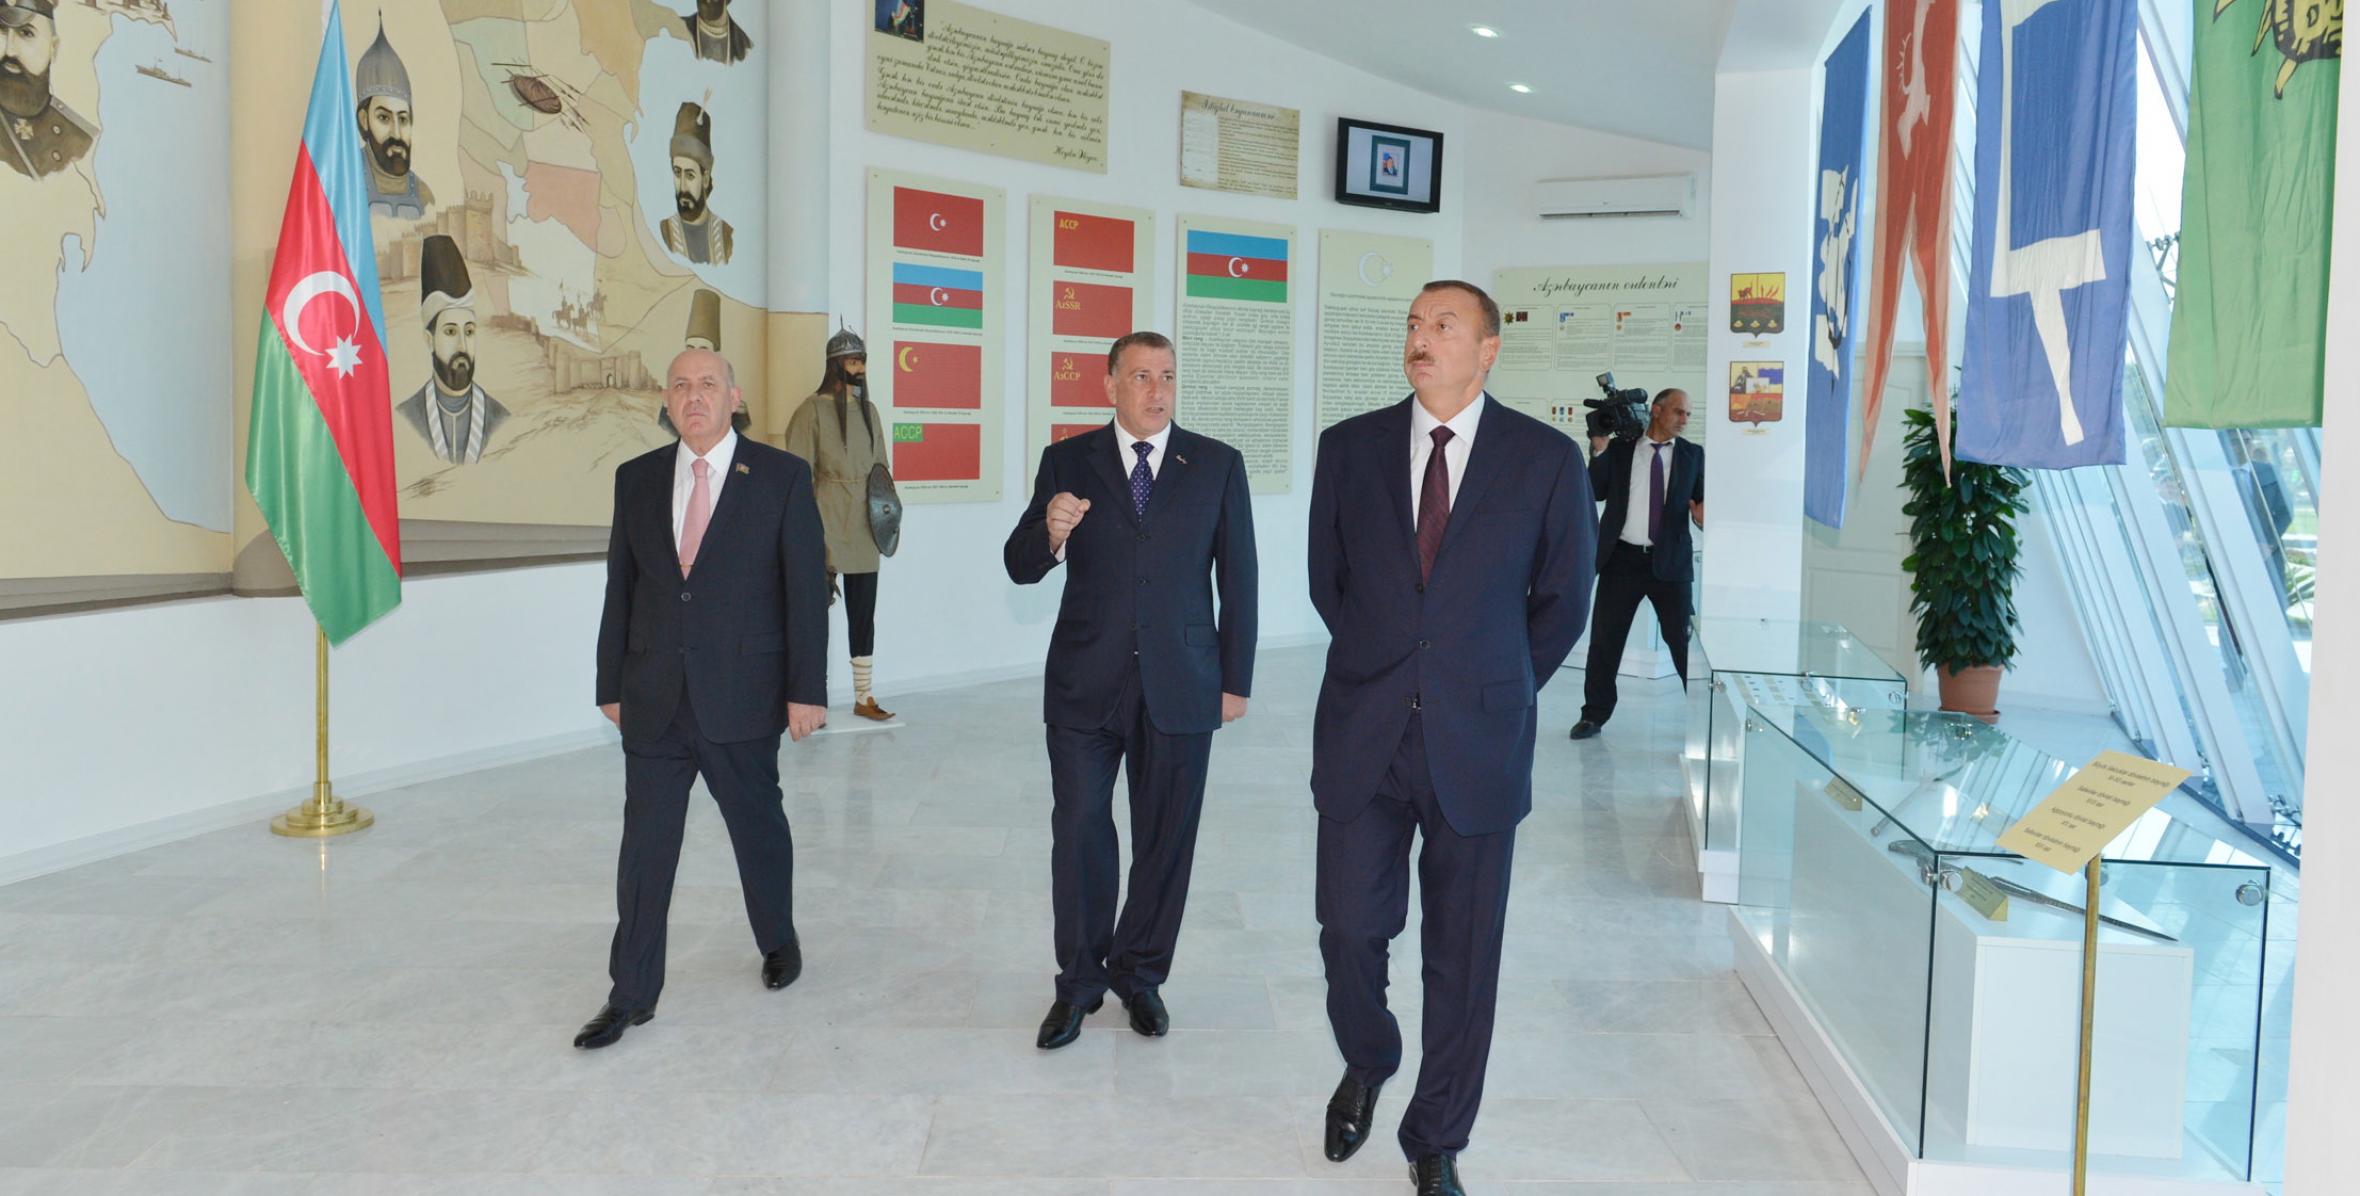 Ilham Aliyev reviewed the Flag Square and Museum in Saatli